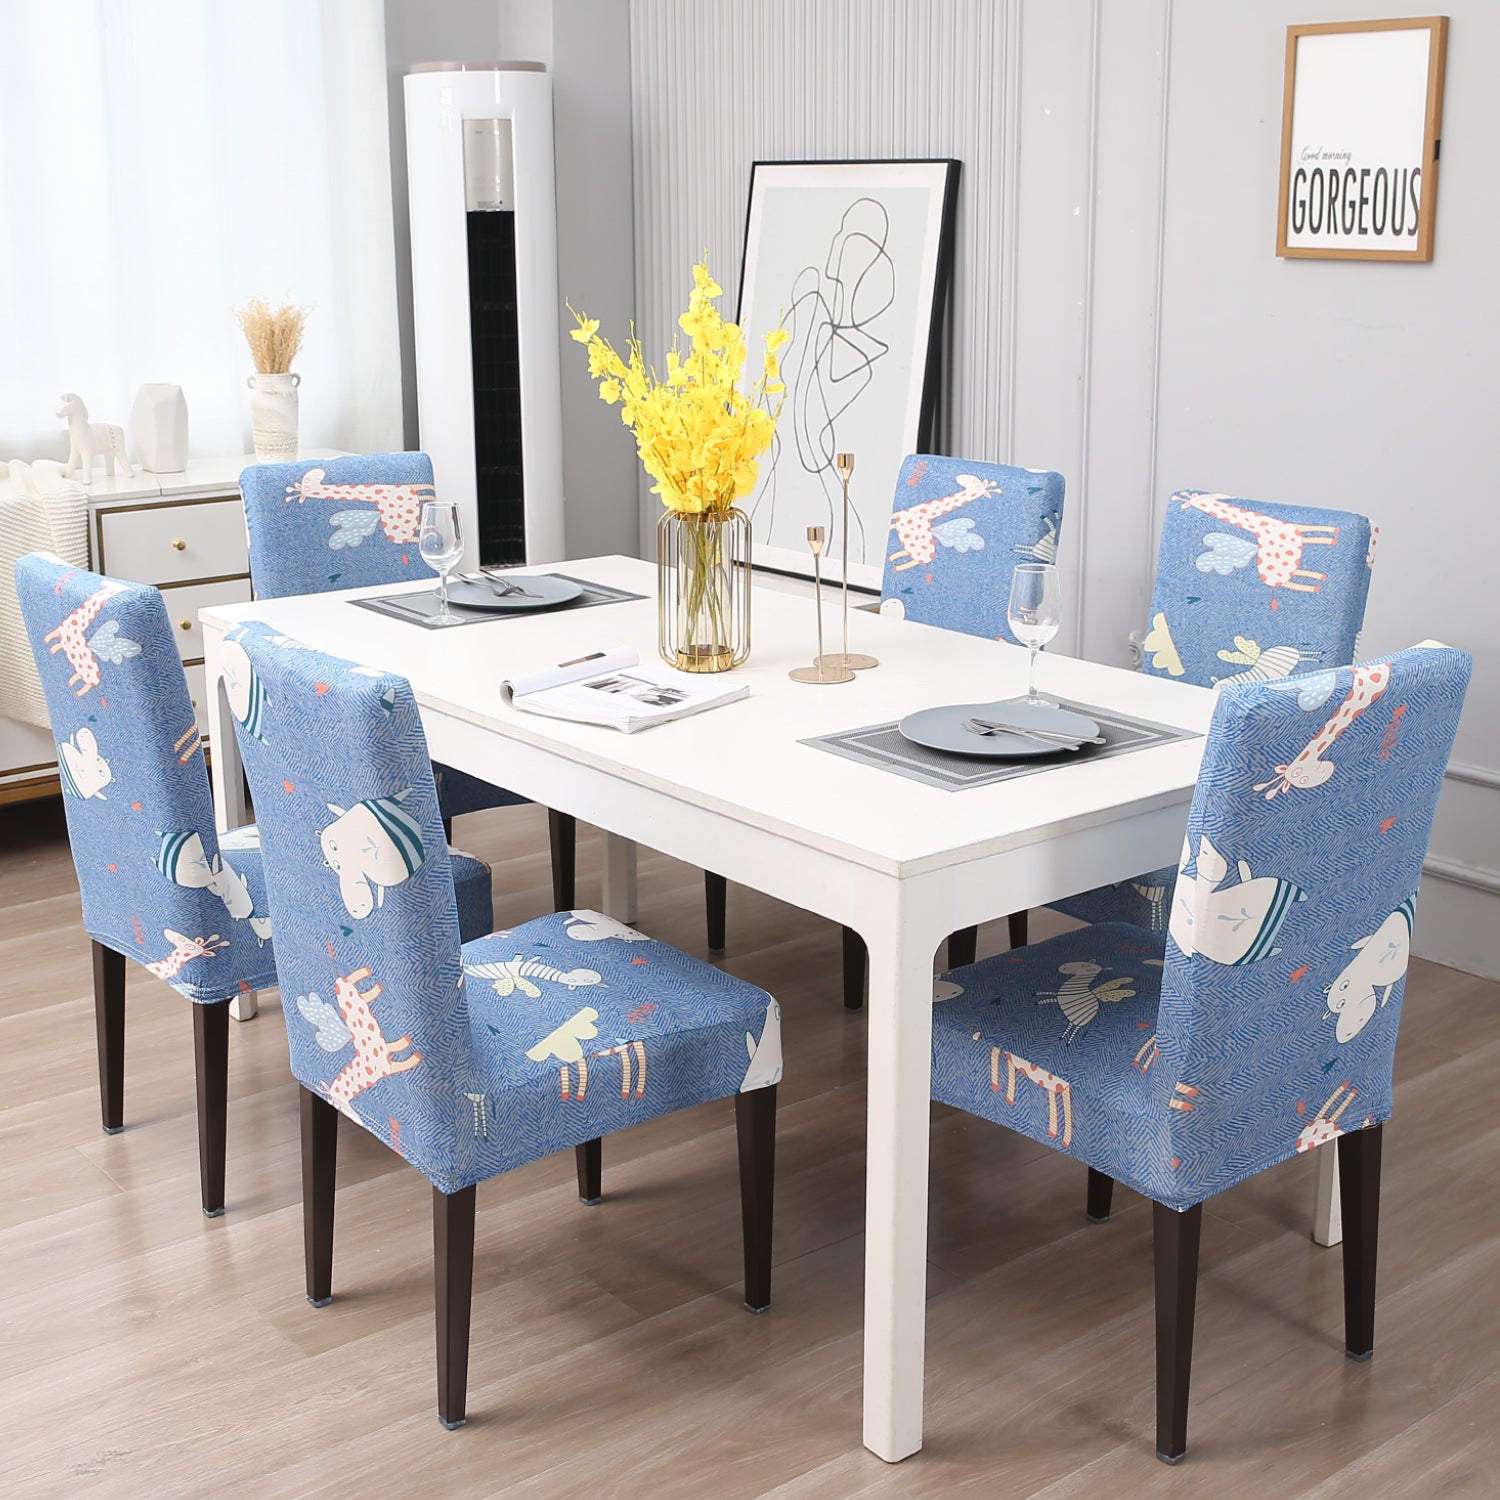 Elastic Stretchable Dining Chair Cover, Sky Blue Happy Animals